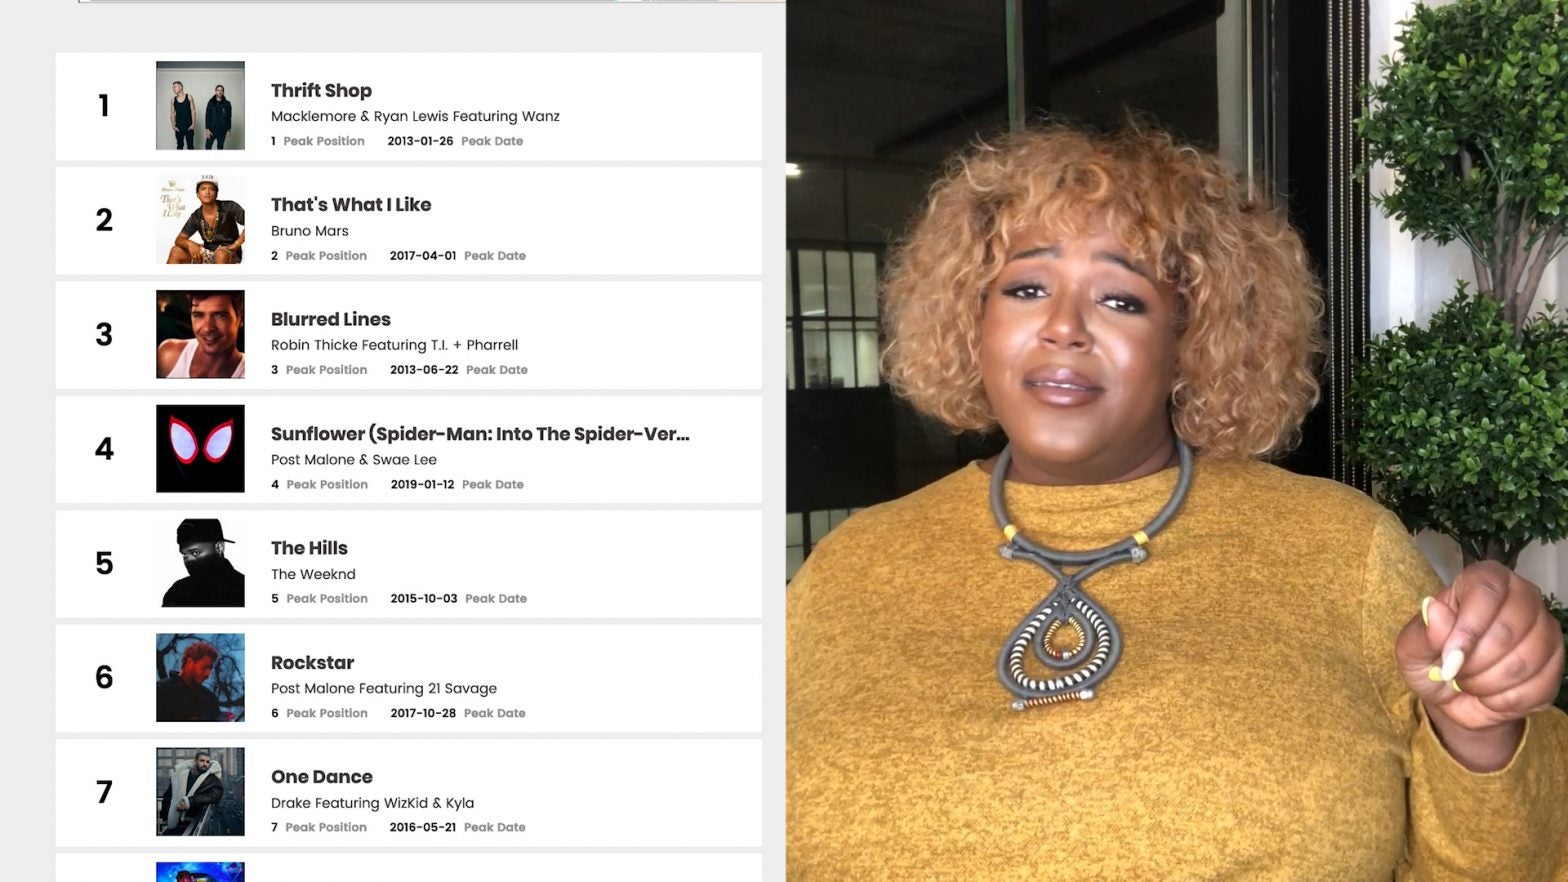 Watch The OverExplainer React To The Interesting 'Billboard' Hot Hip-Hop And R&B Songs Of The Decade List